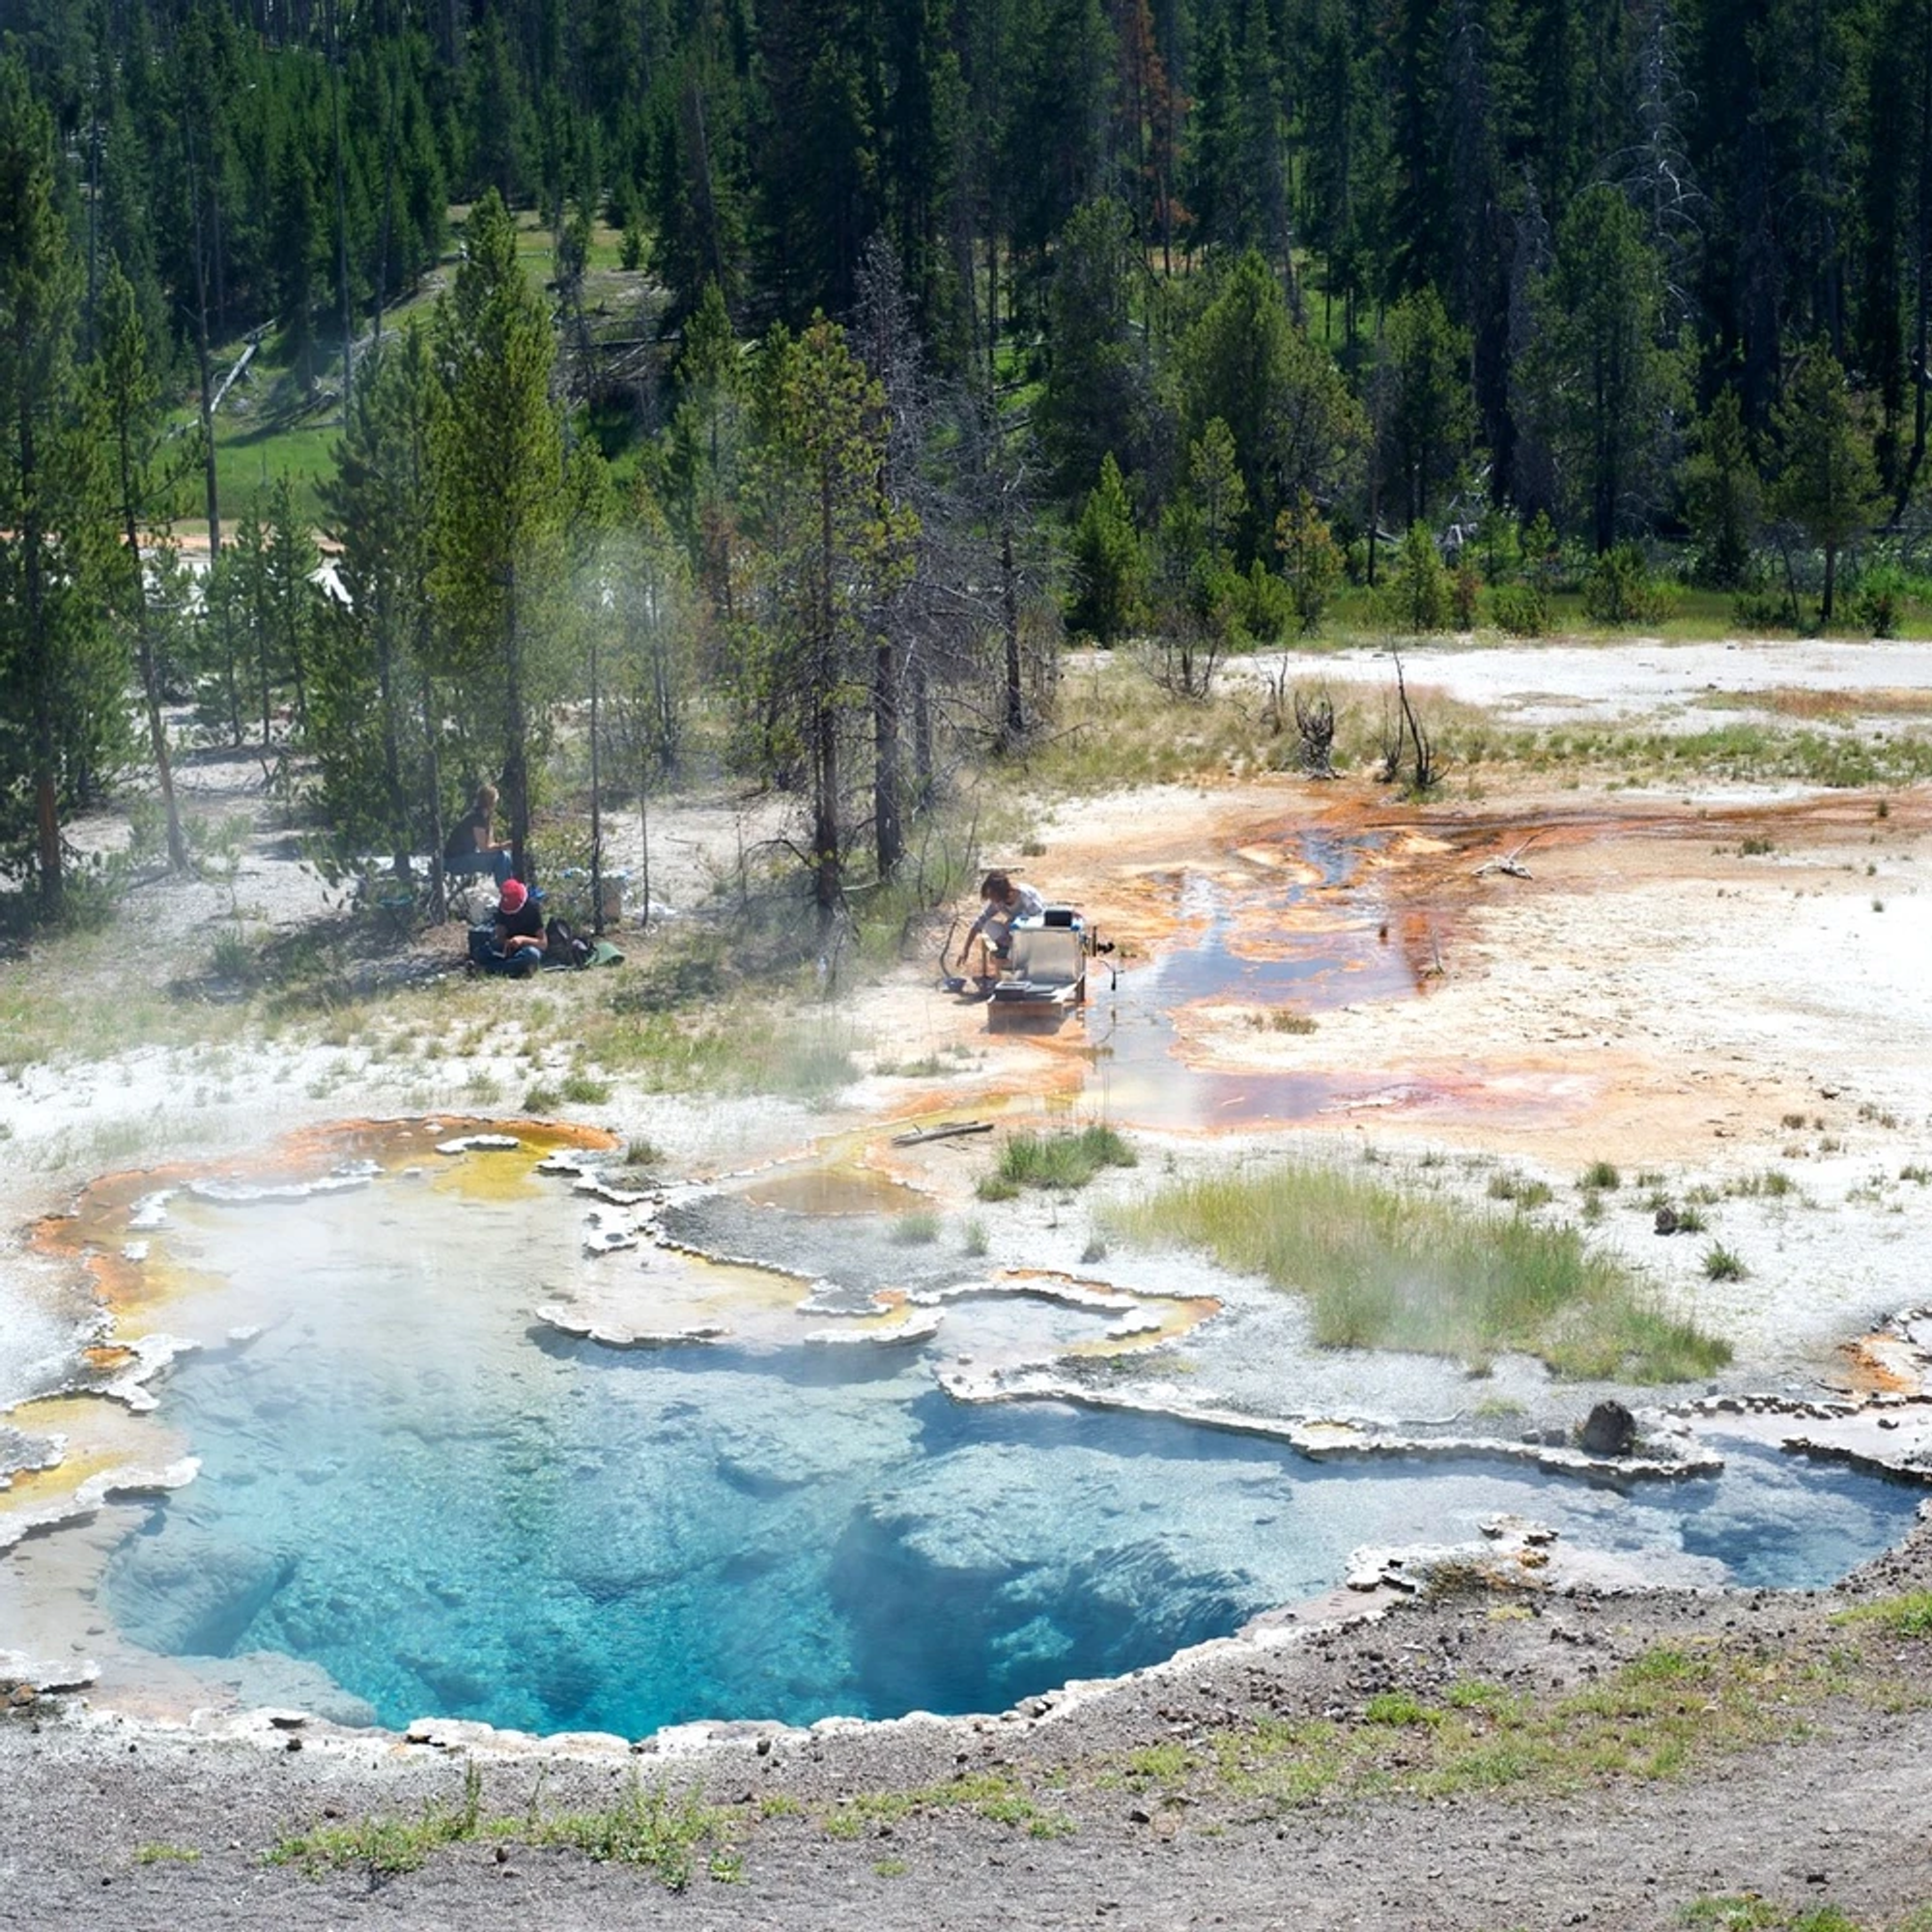 Octopus spring, Yellowstone National Park. Credit: Carnegie Institution for Science 